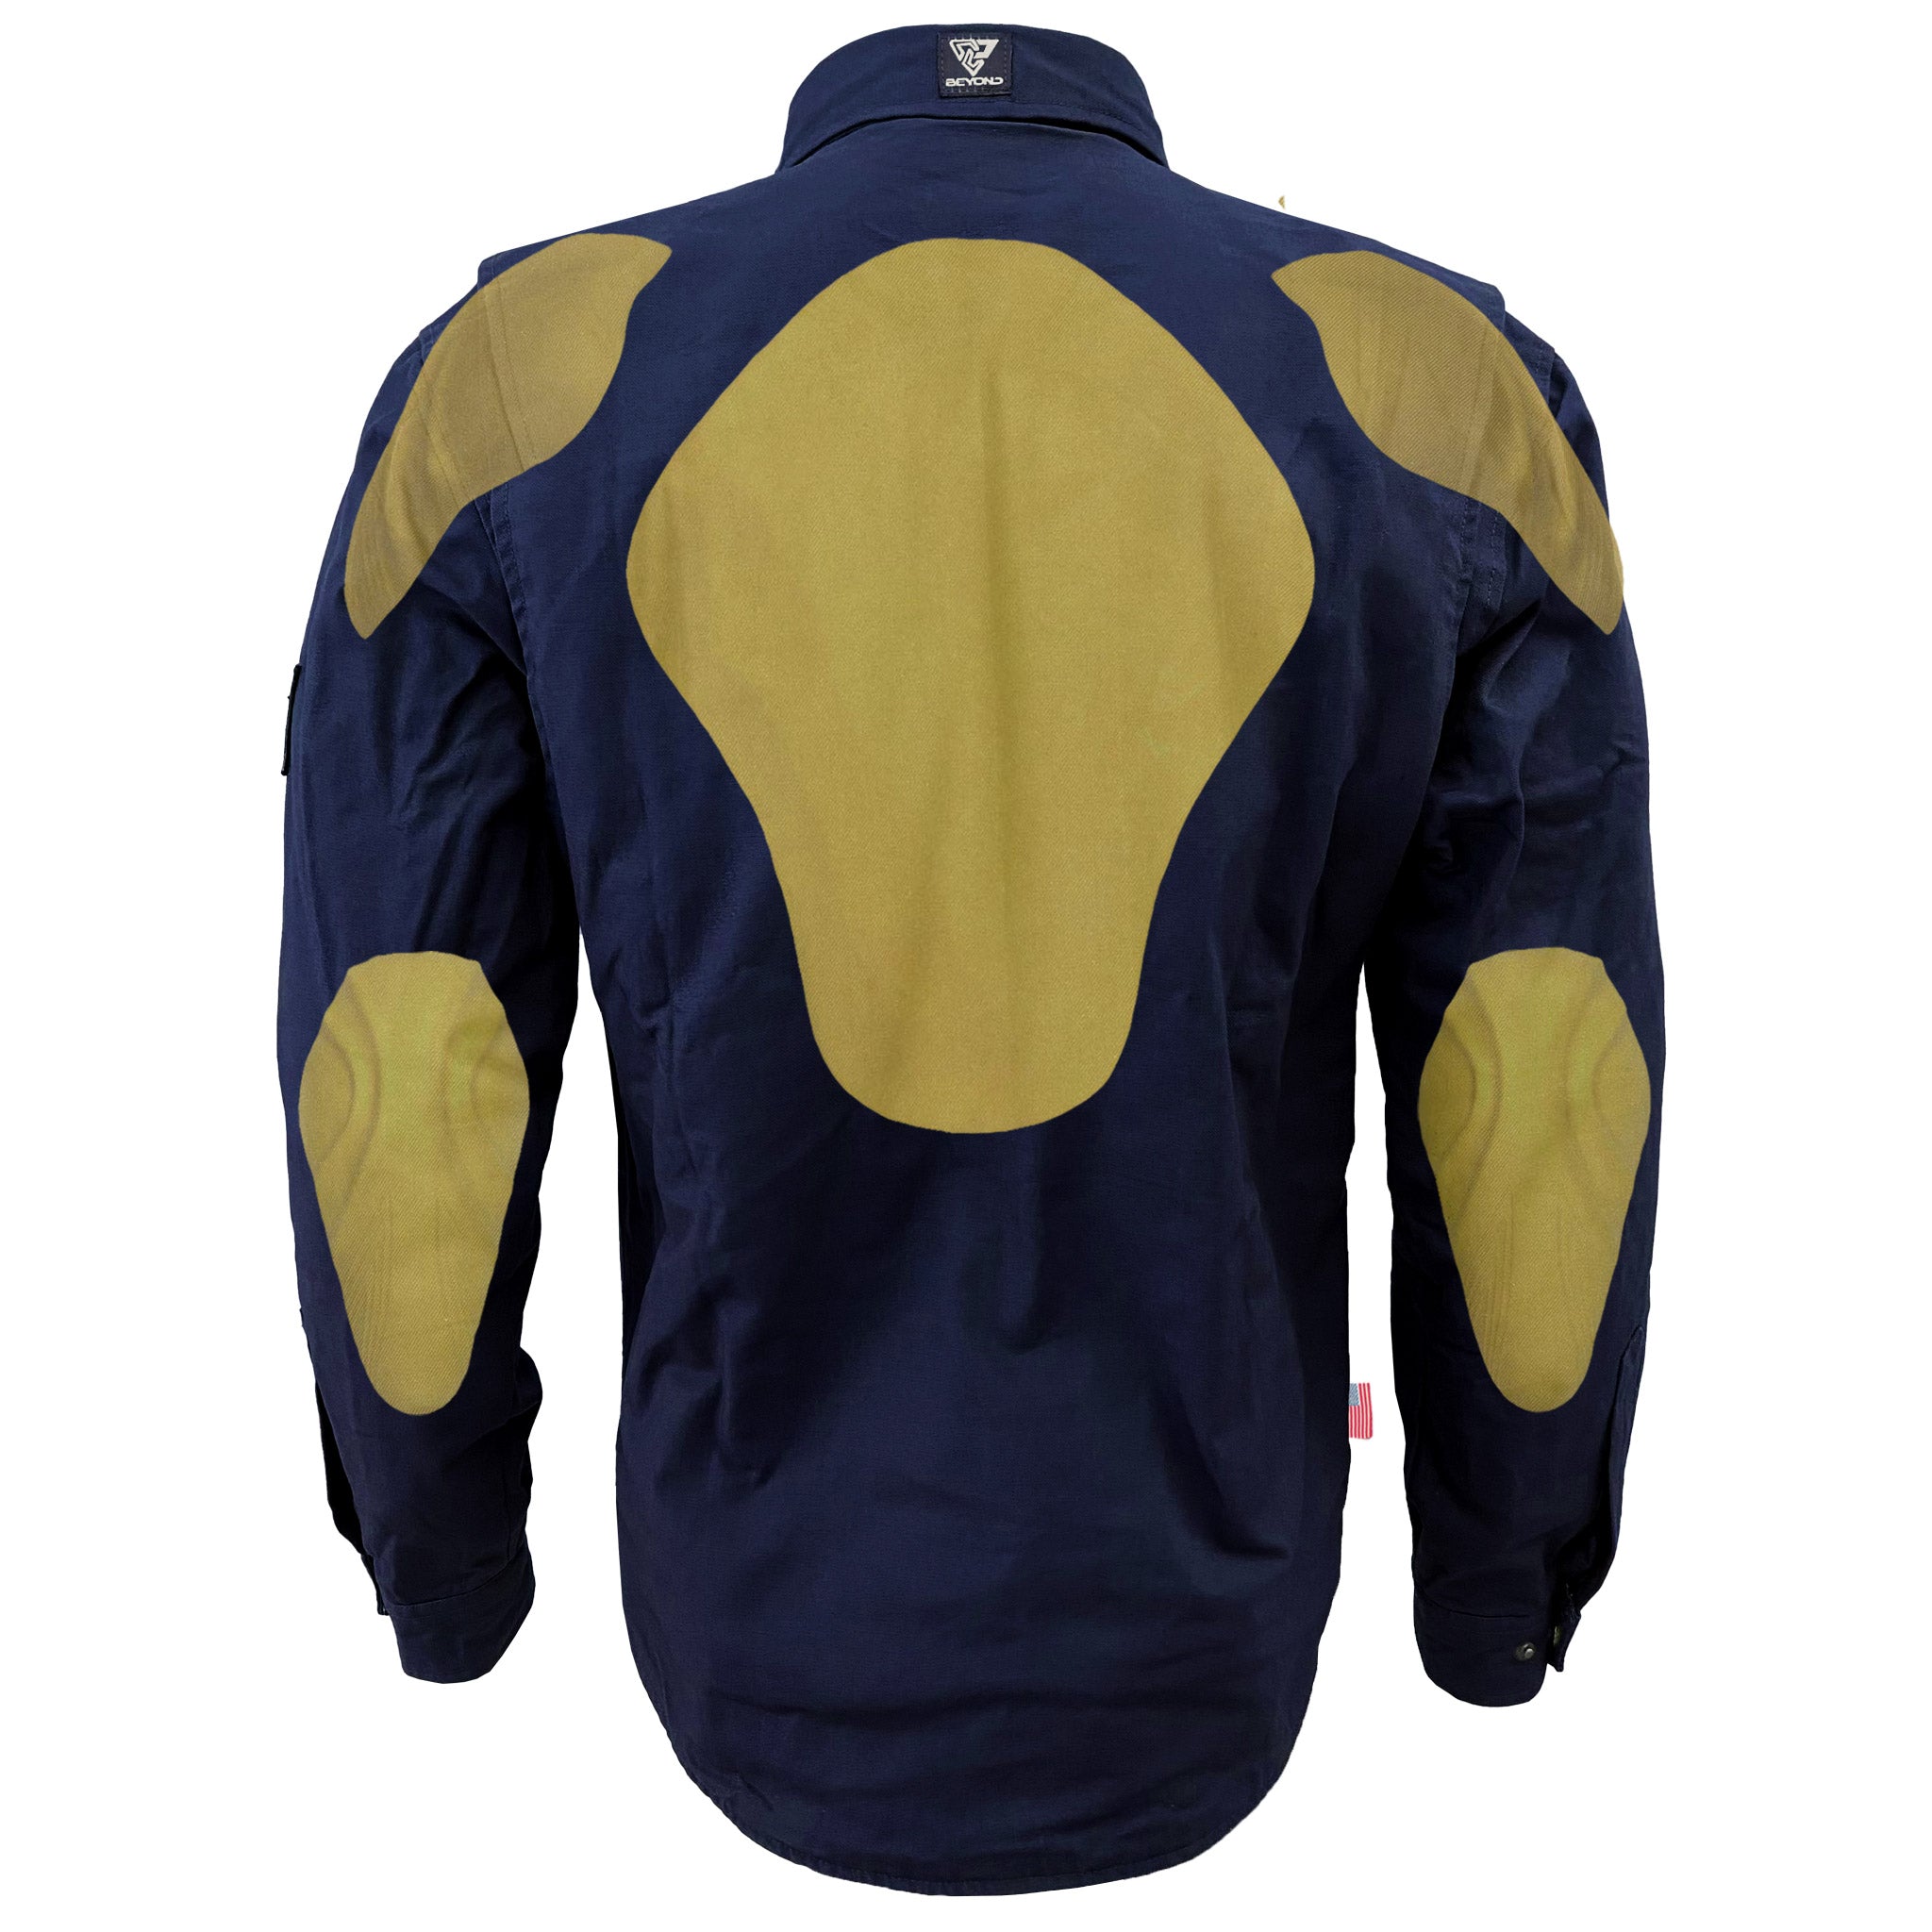 Men's-Canvas-Navy-Blue-Solid-Jacket-Back-With-Pads